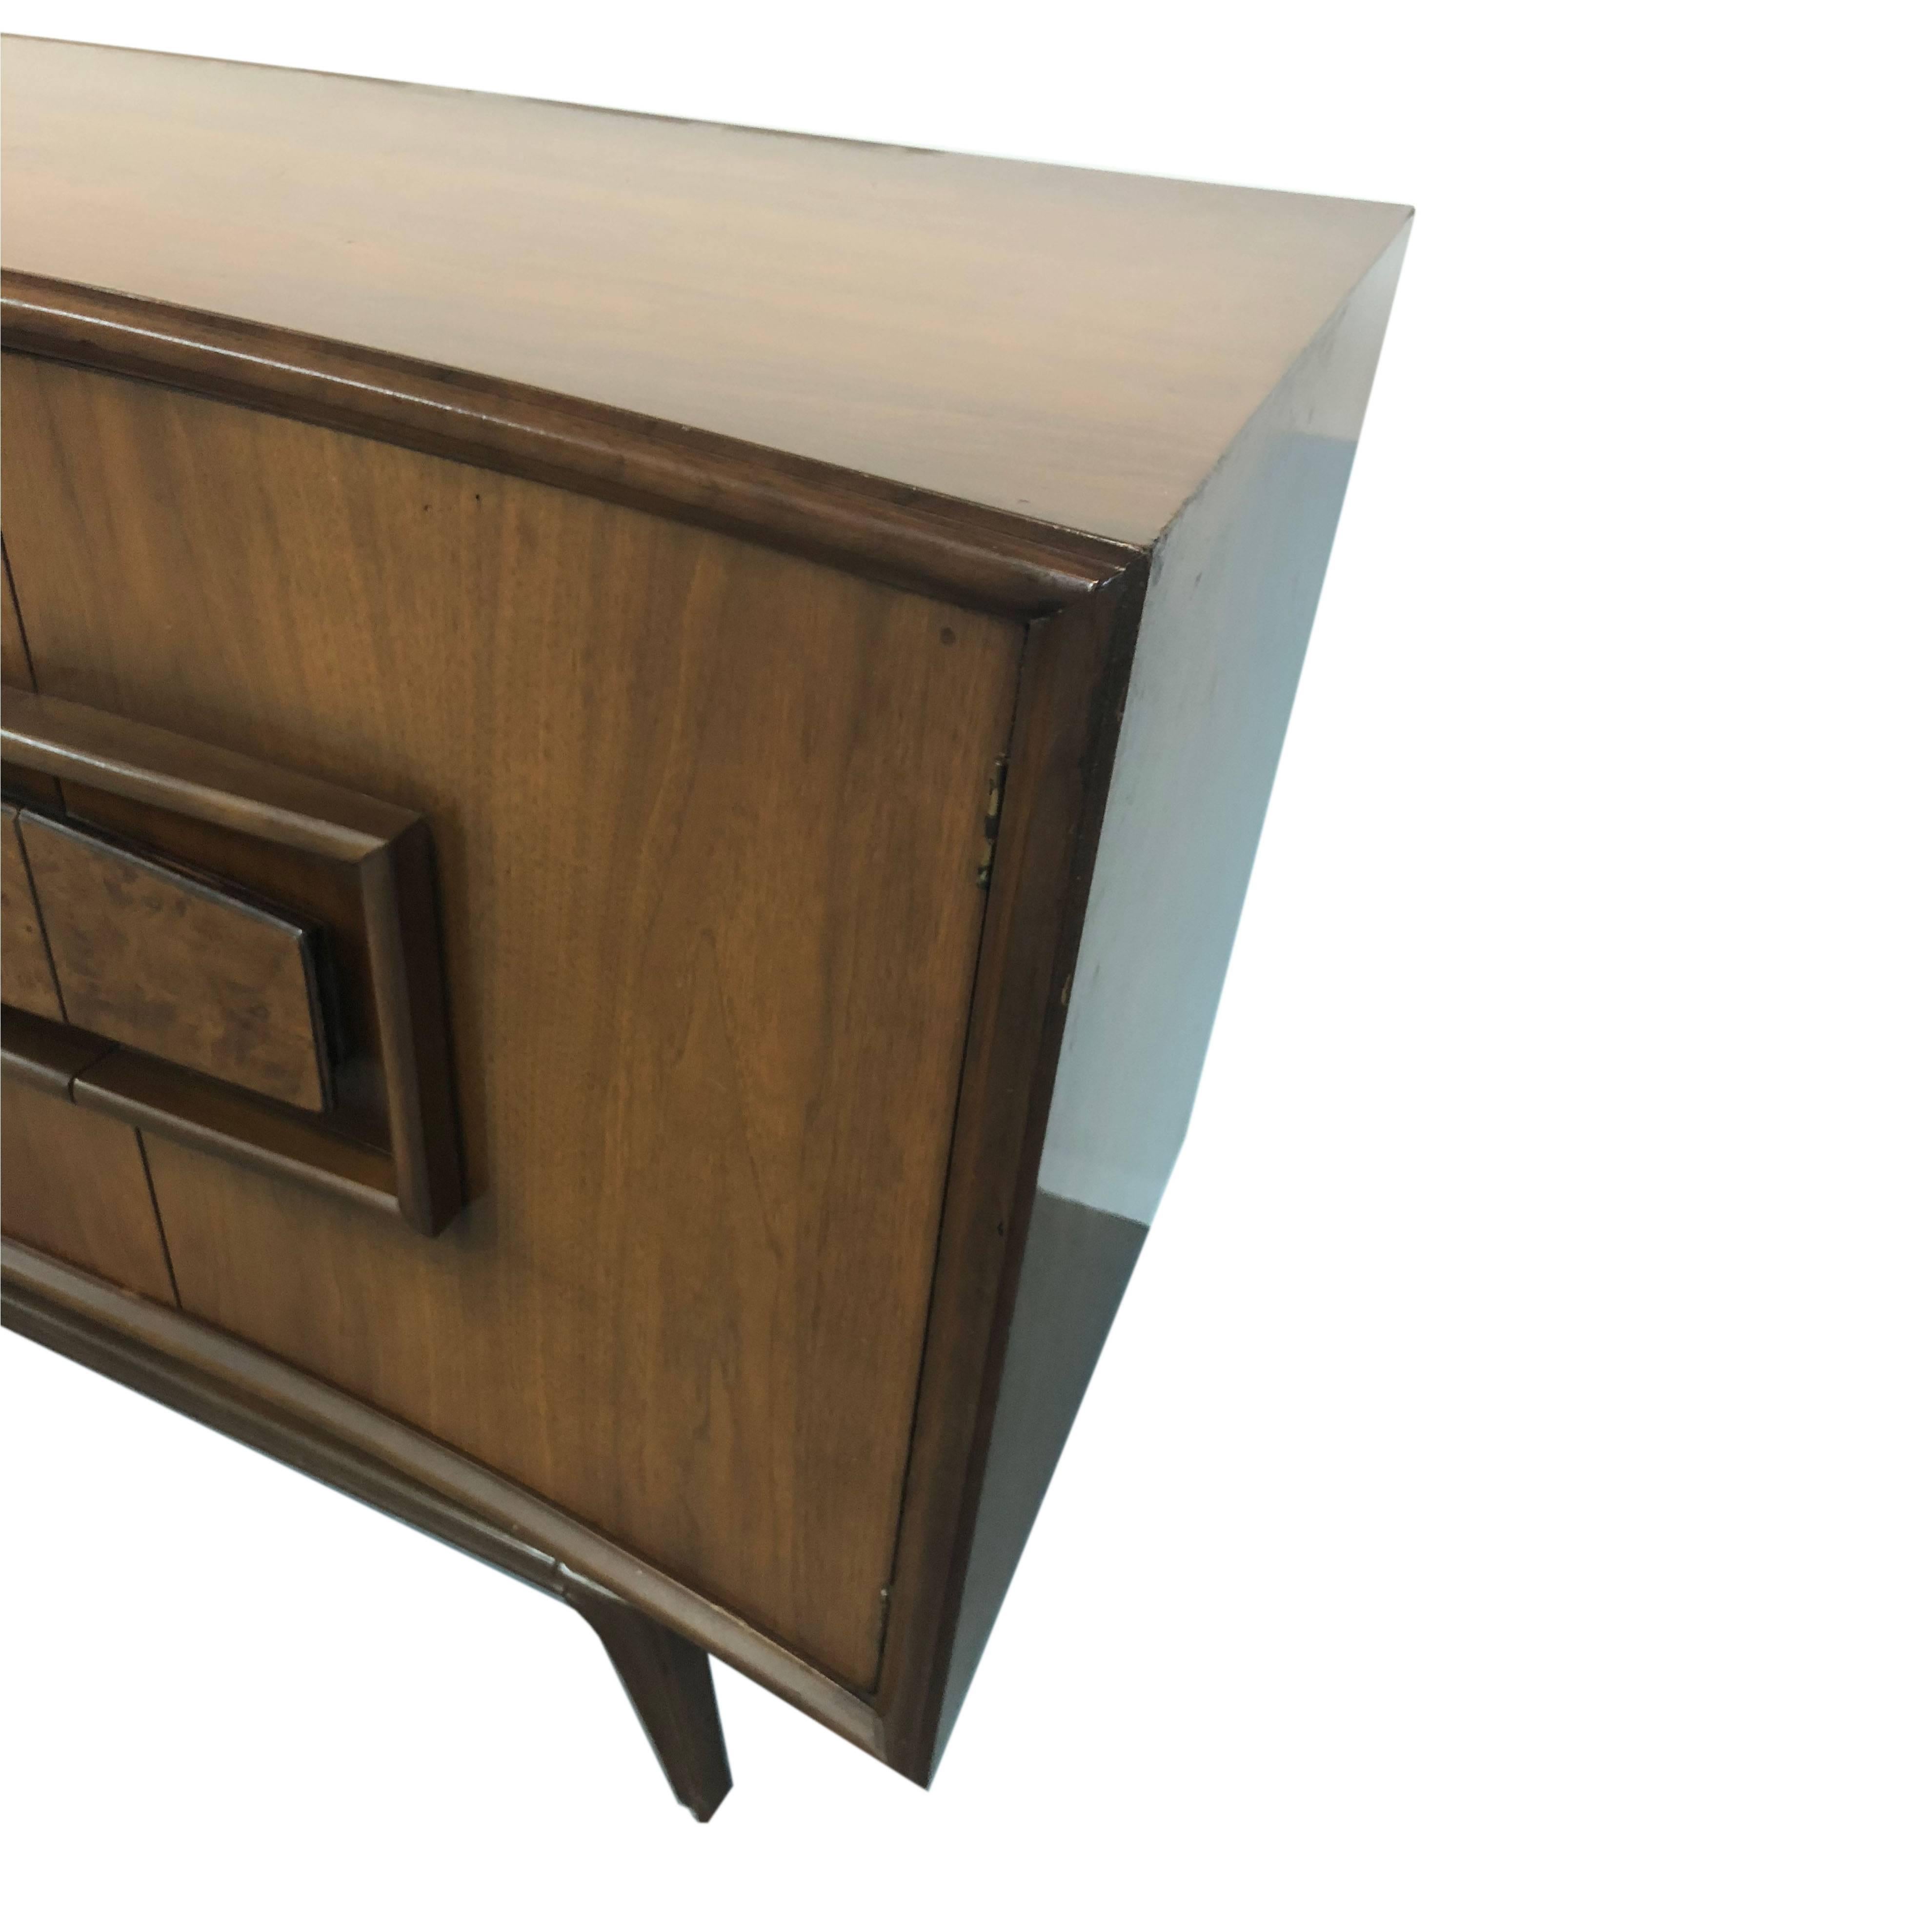 Midcentury Danish Modern Walnut Credenza/Dresser In Good Condition For Sale In New Hyde Park, NY